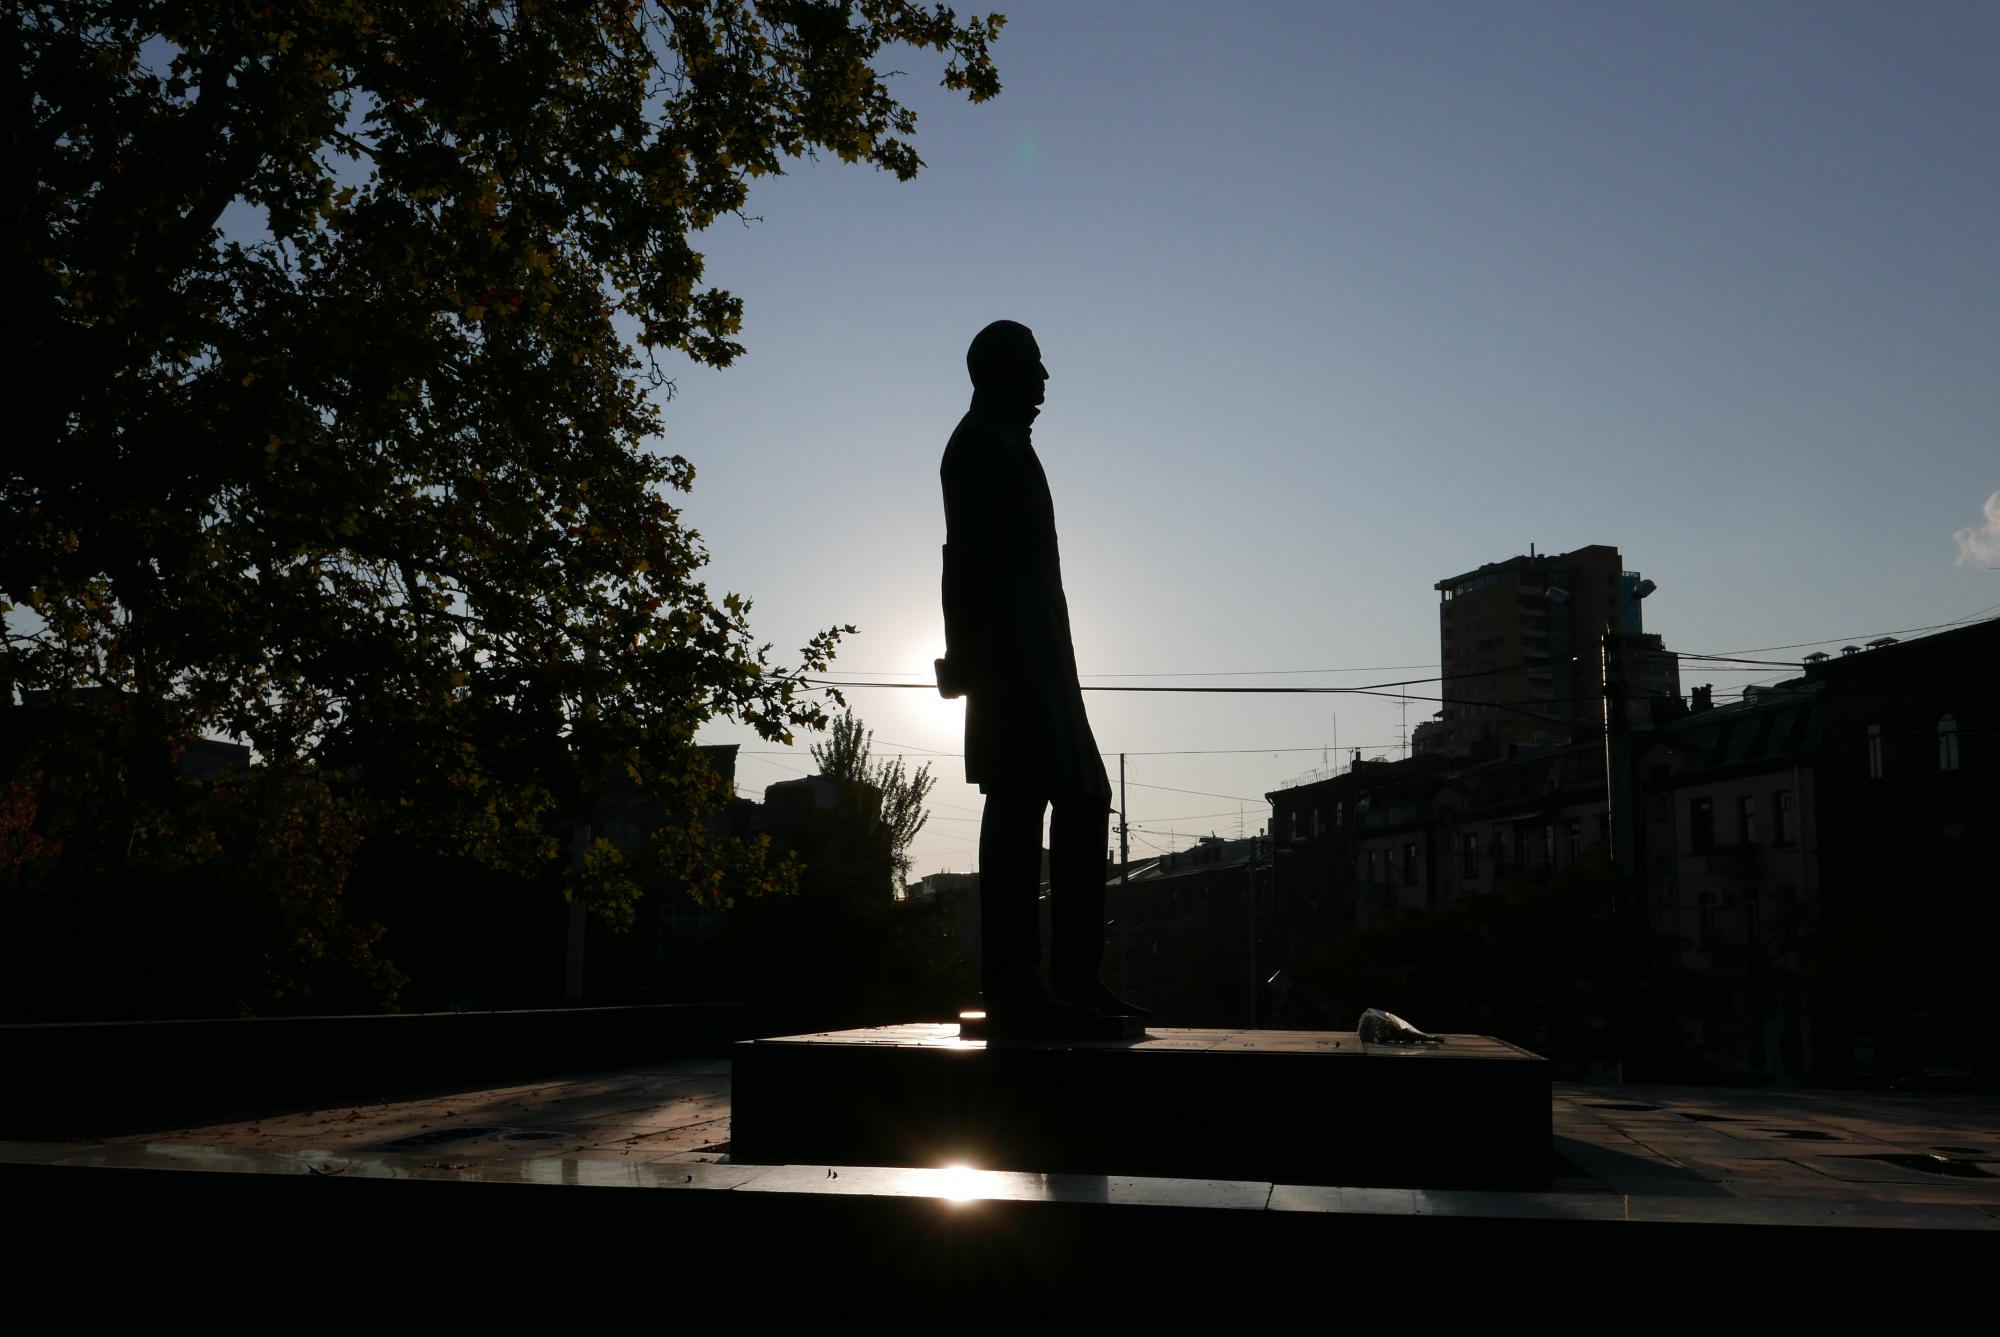 Statue to Noted Russian Diplomat and Poet Griboyedov Vandalized in Yerevan